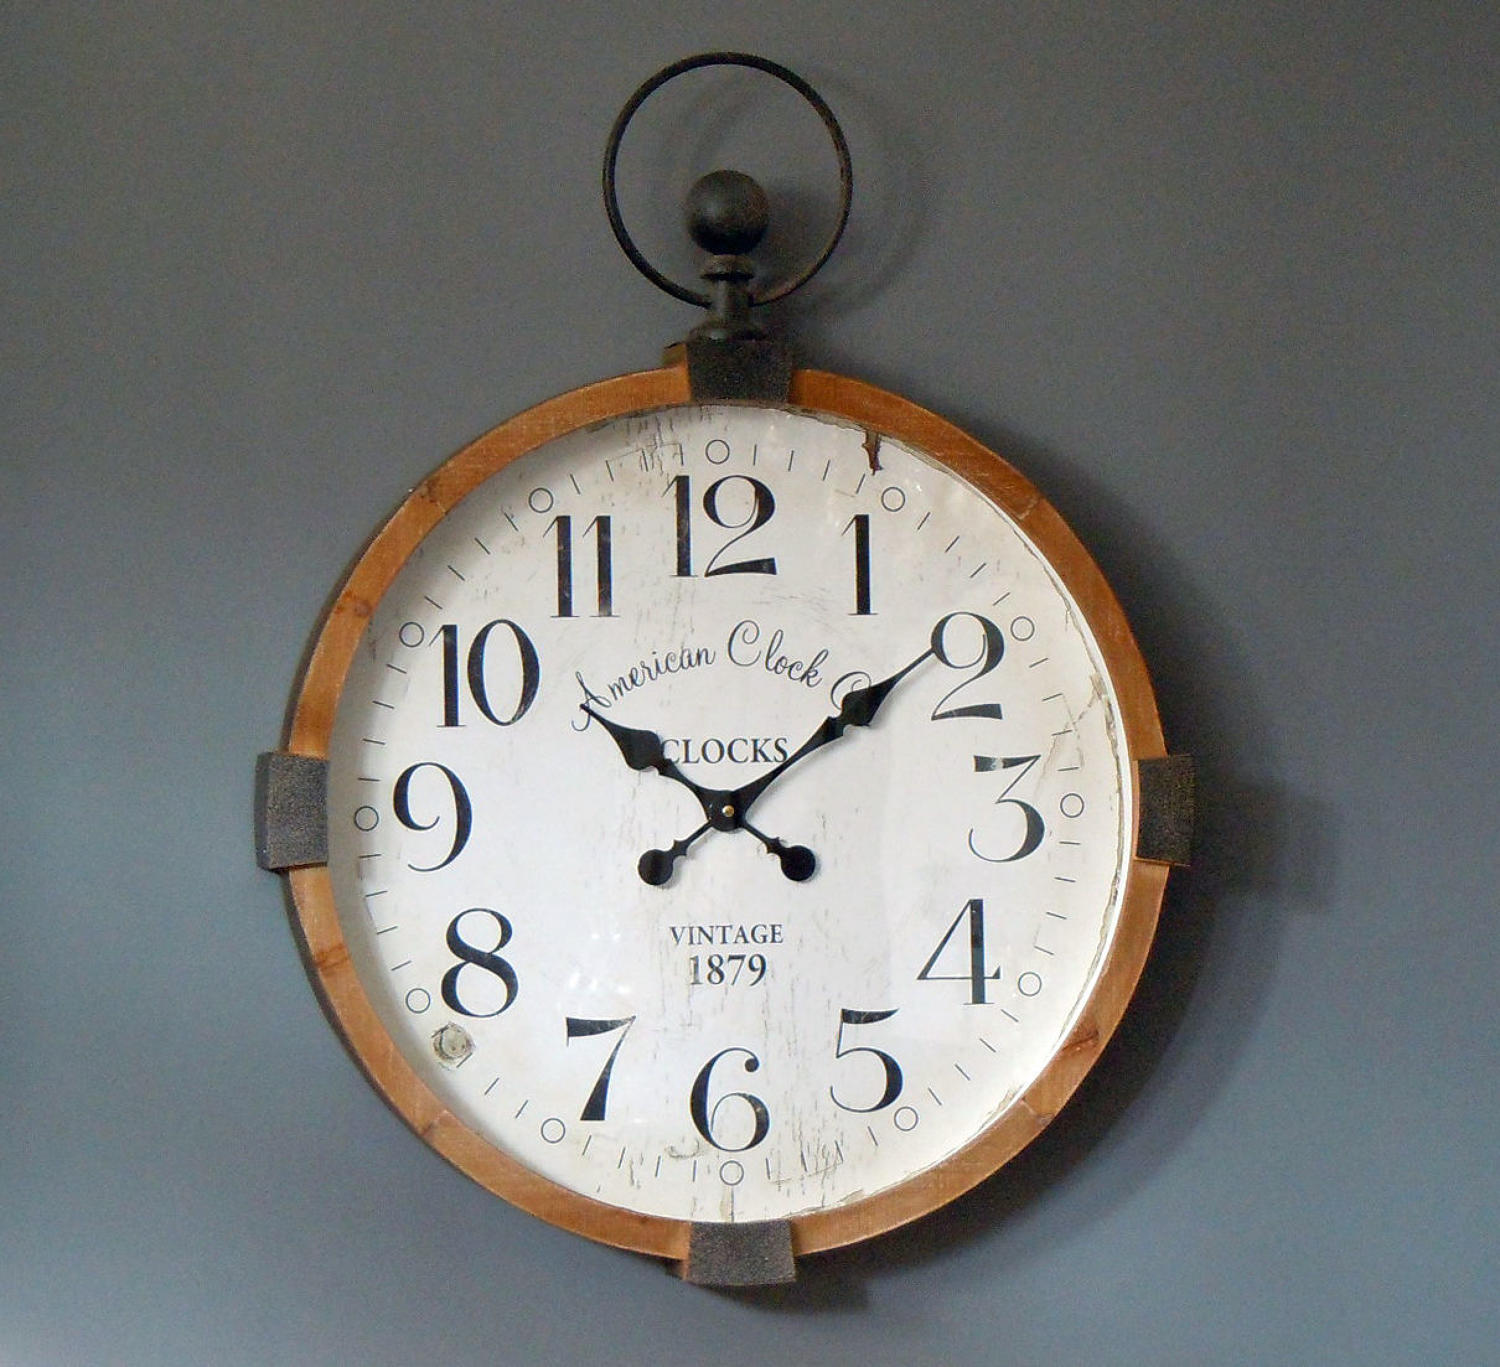 Rustic industrial wood and metal round wall clock